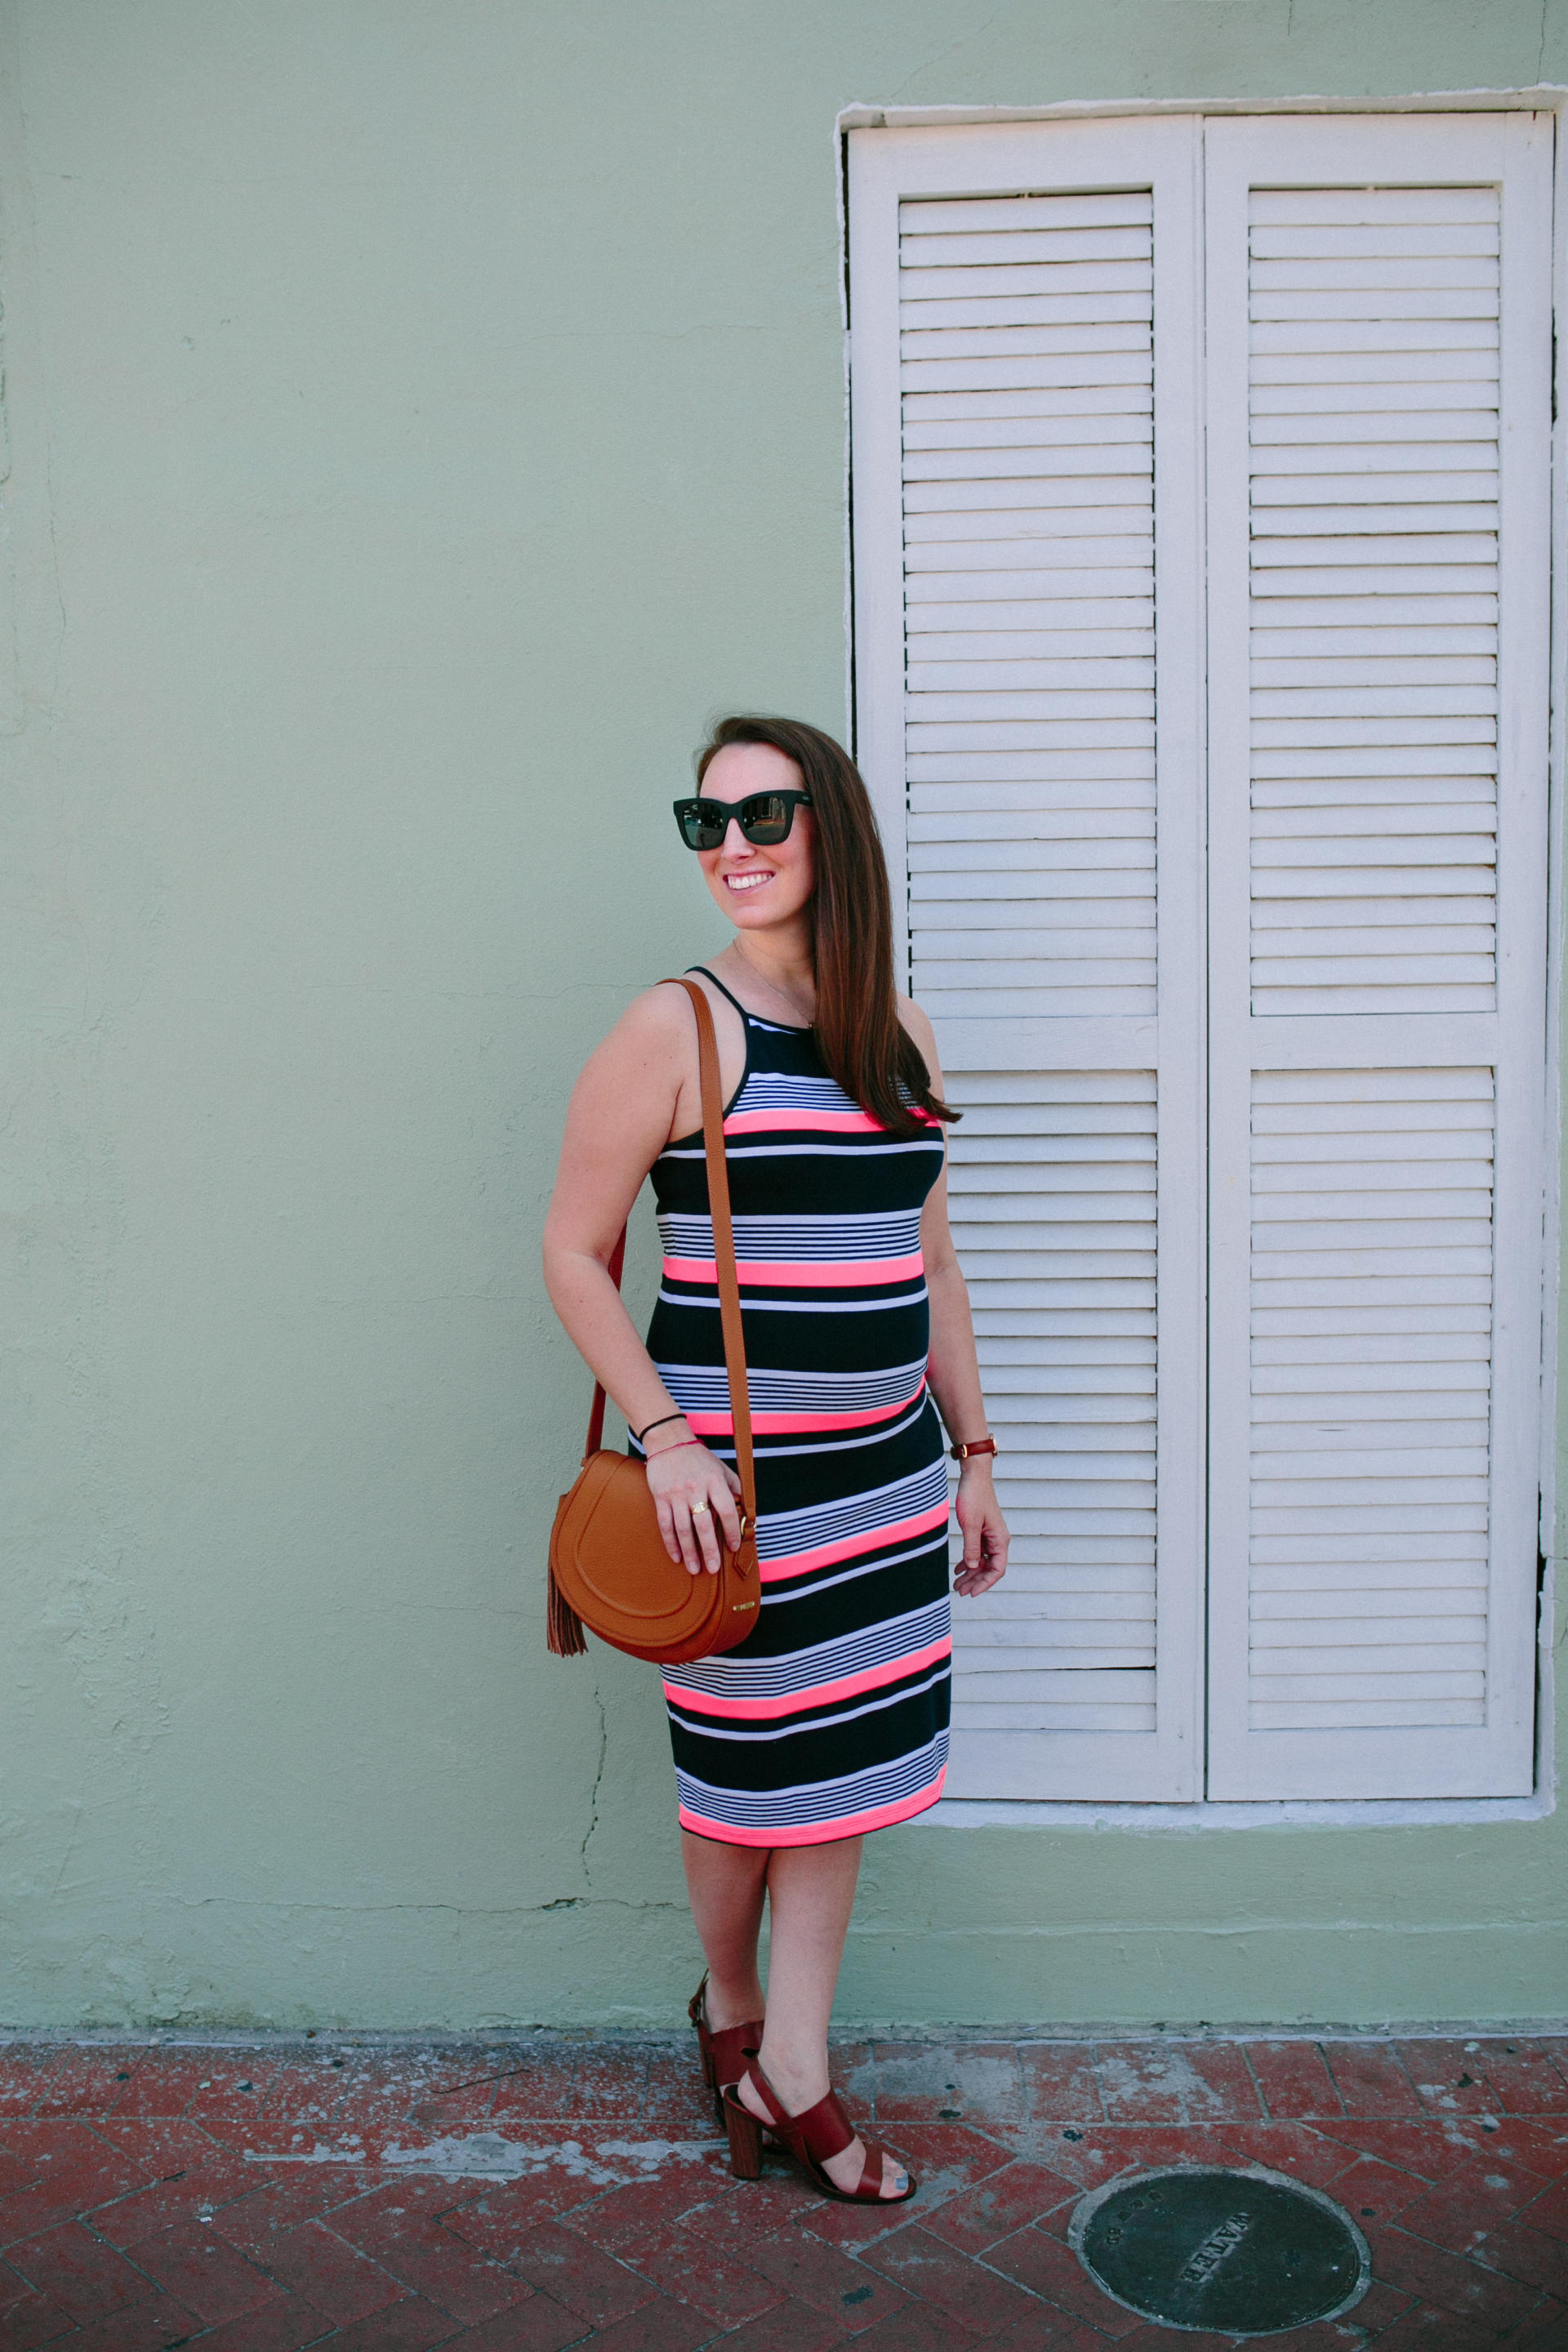 STYLE: French Quarter Stripes with a Superdry Dress by New Jersey style blogger What's For Dinner Esq.